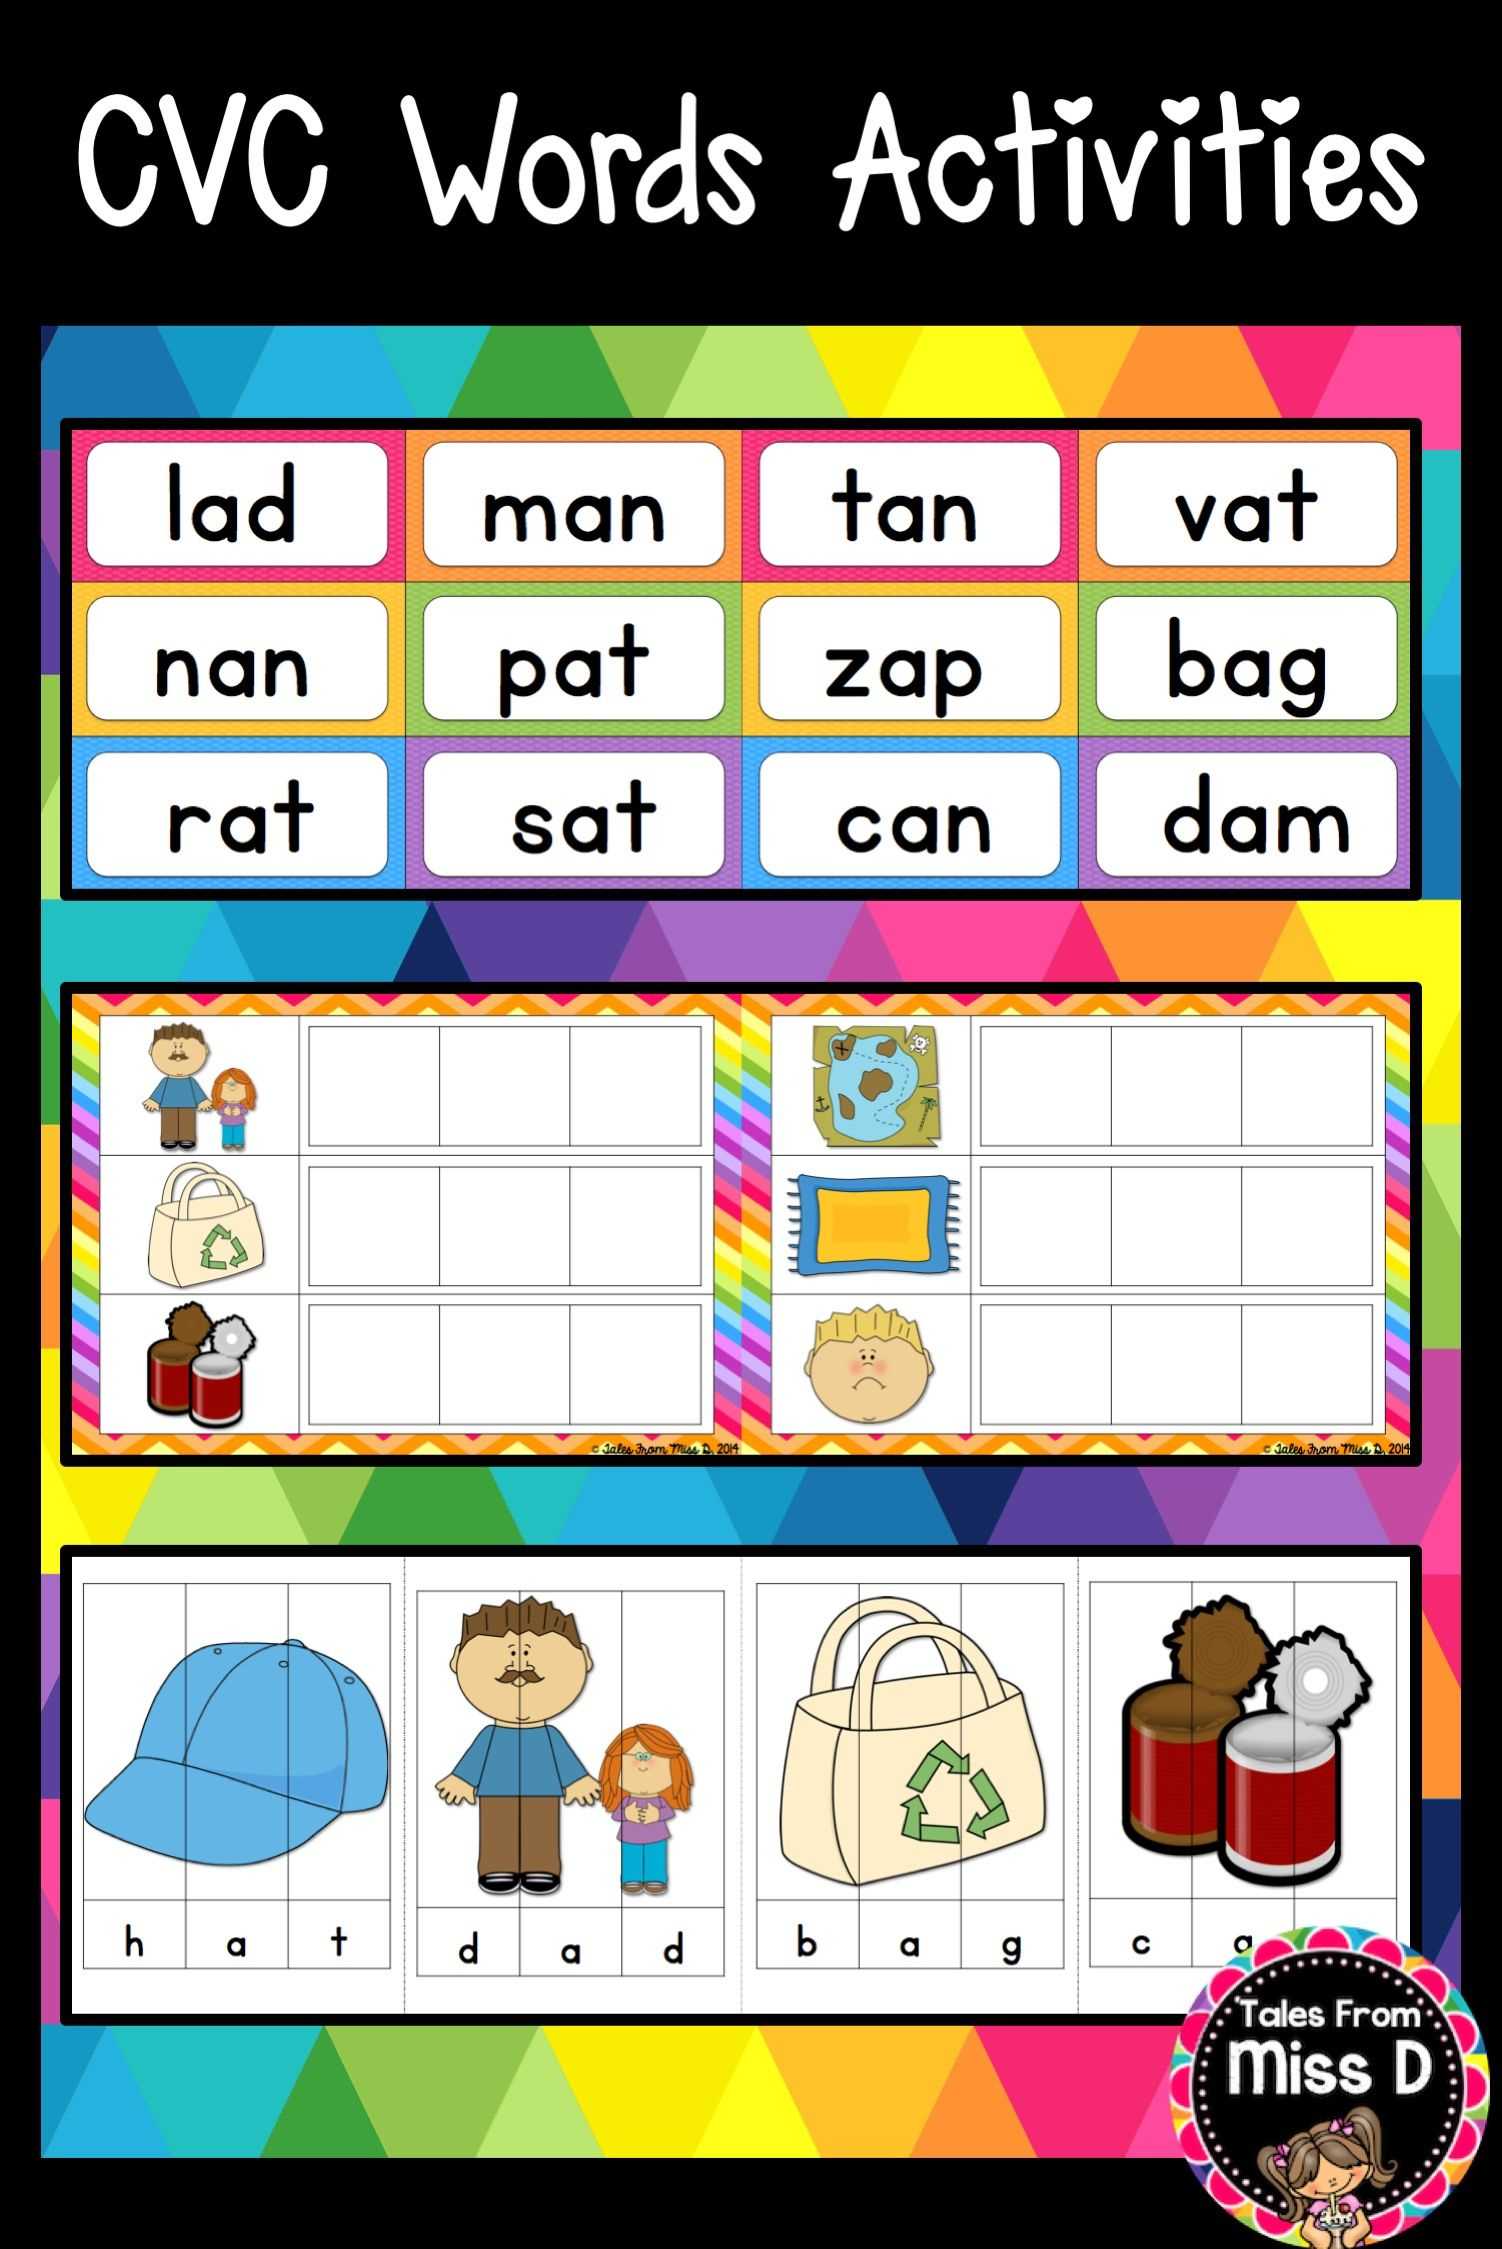 Cvc Words Activities | Education | Cvc Words, Making Words In Making Words Template